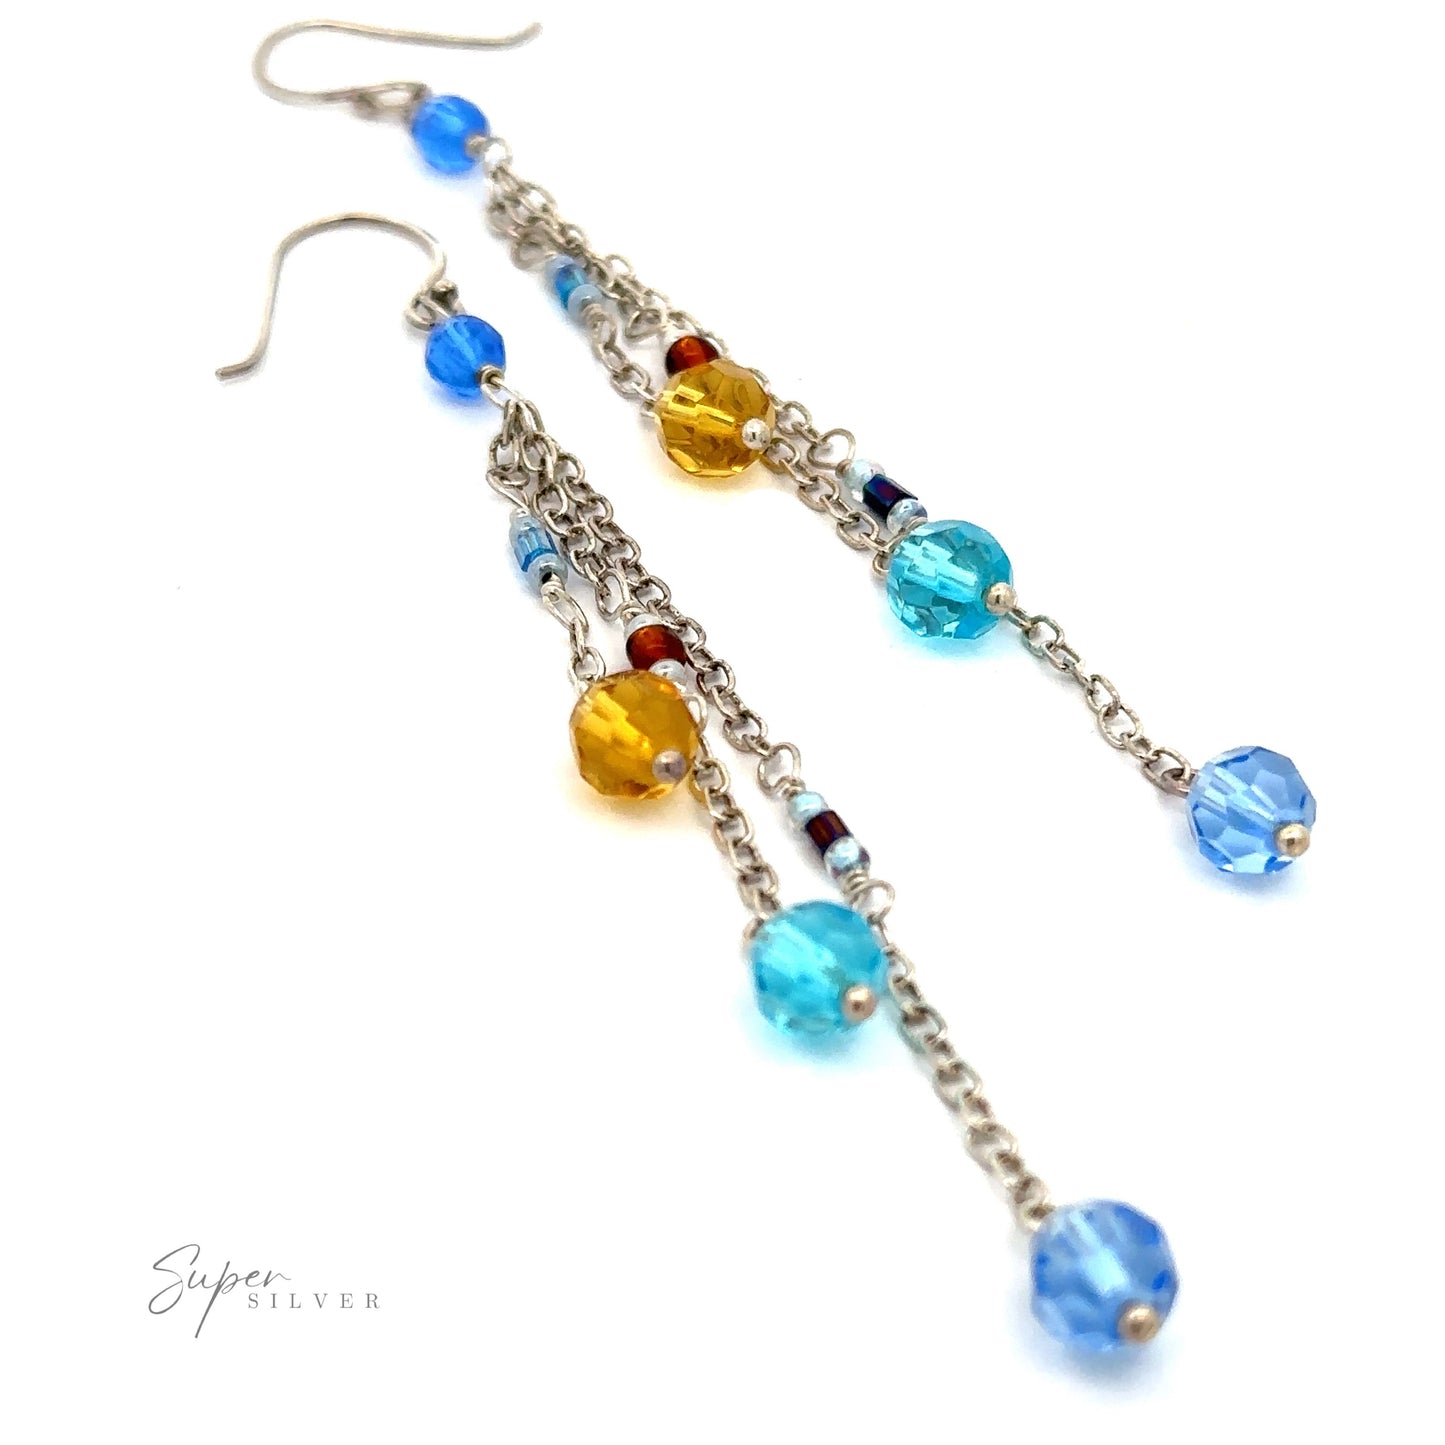 
                  
                    Two Multicolor Beaded Dangle Earrings adorned with multicolored beads in blue, yellow, and red hues. The earrings feature sleek chain details and multiple beads along the length.
                  
                